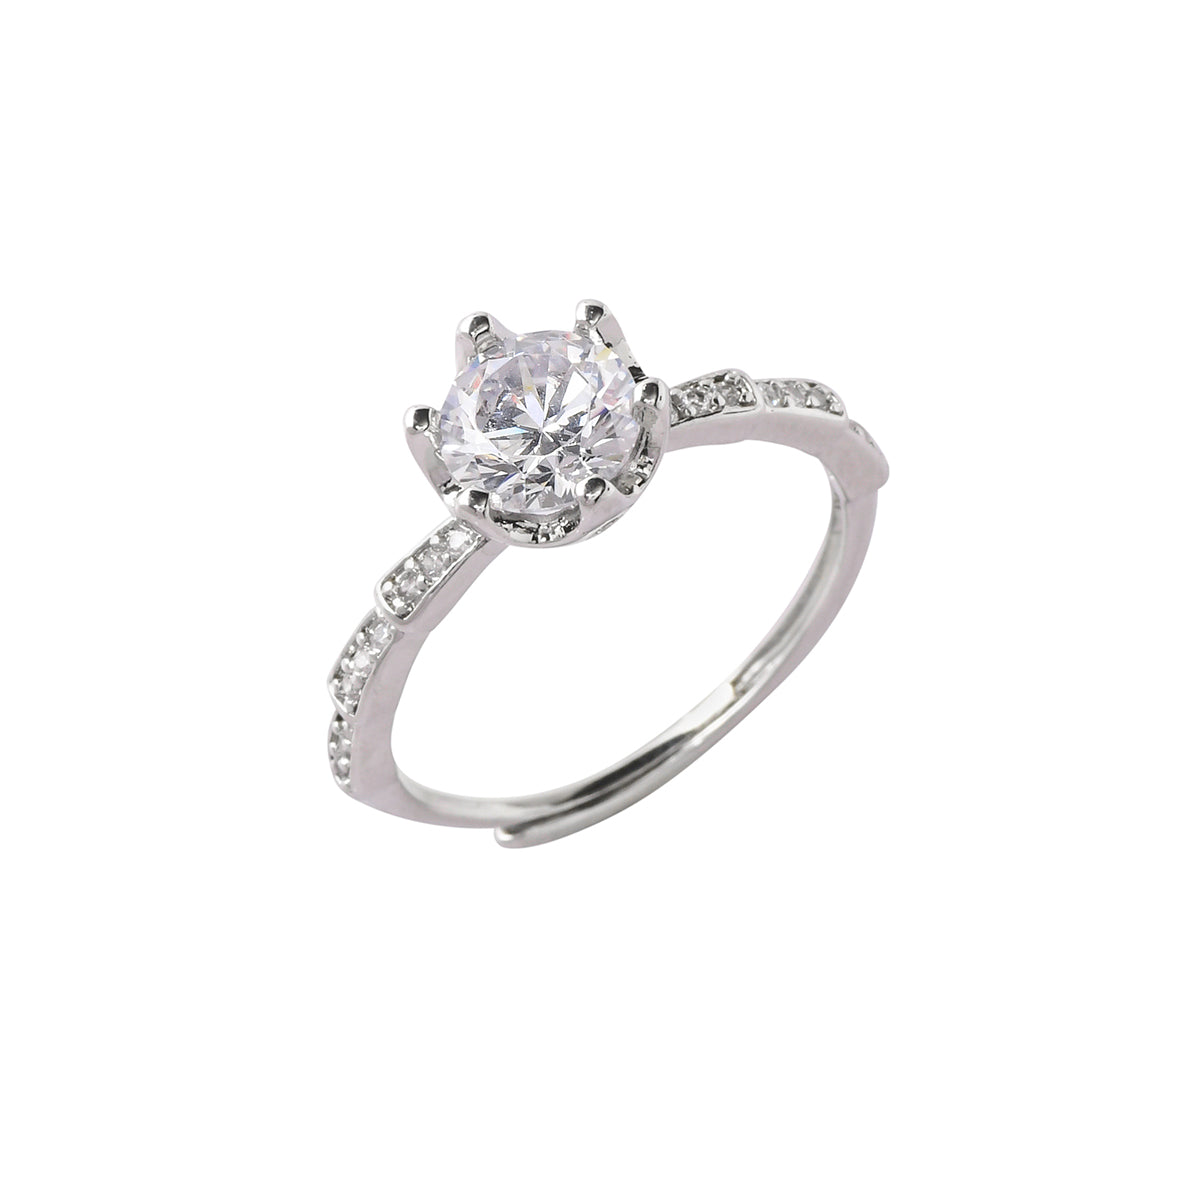 Large Round Cut Zircon Gemstone Adorned Silver Plated Ring